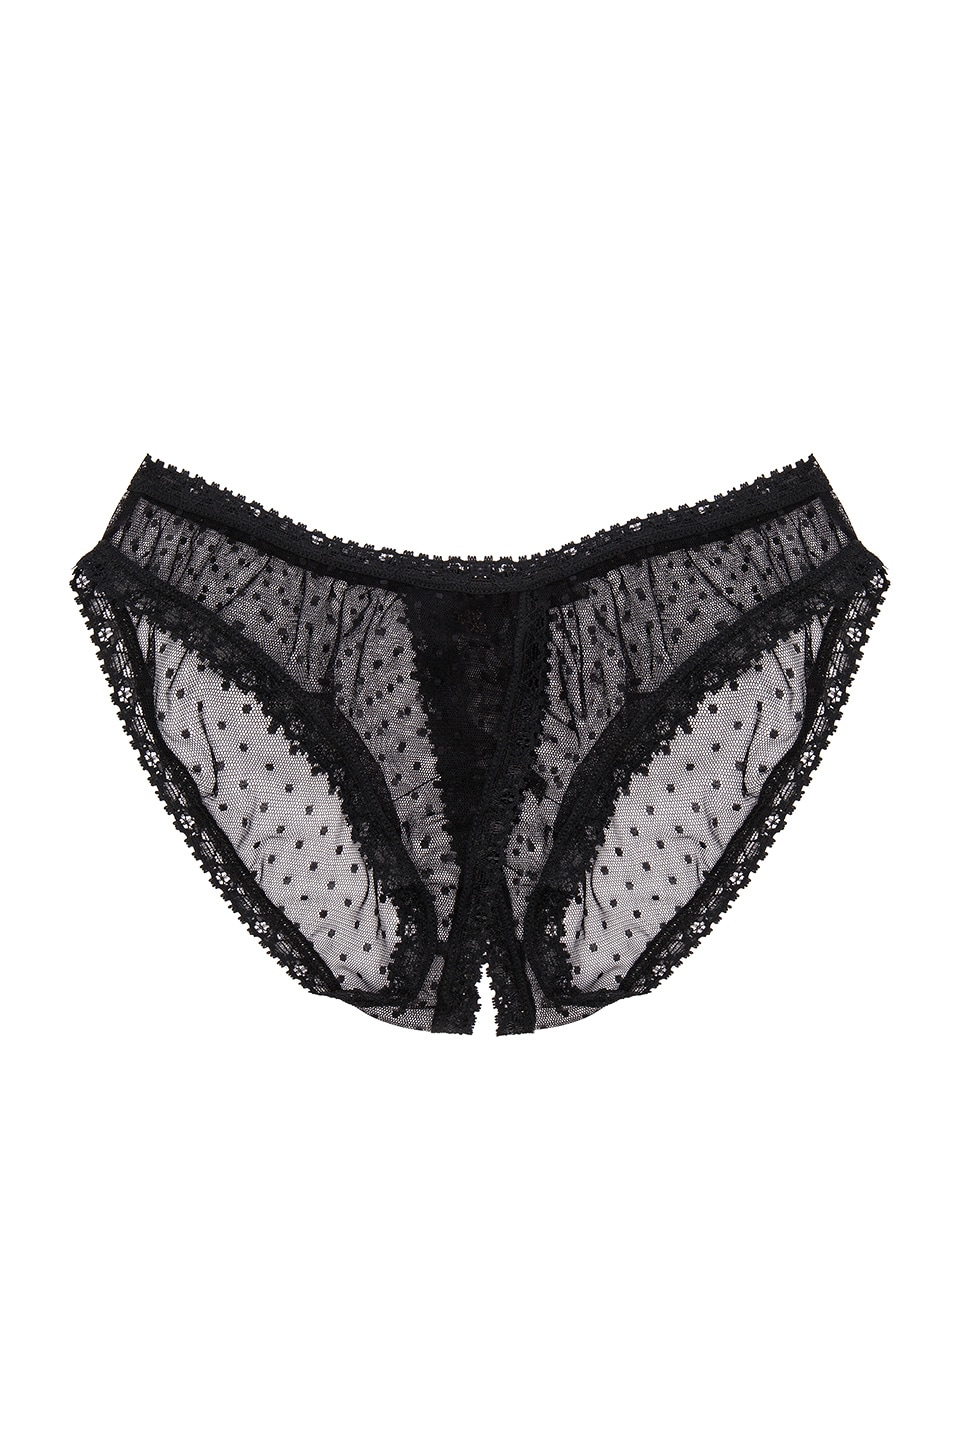 Only Hearts Coucou Lola Coucou Culotte in Black | REVOLVE